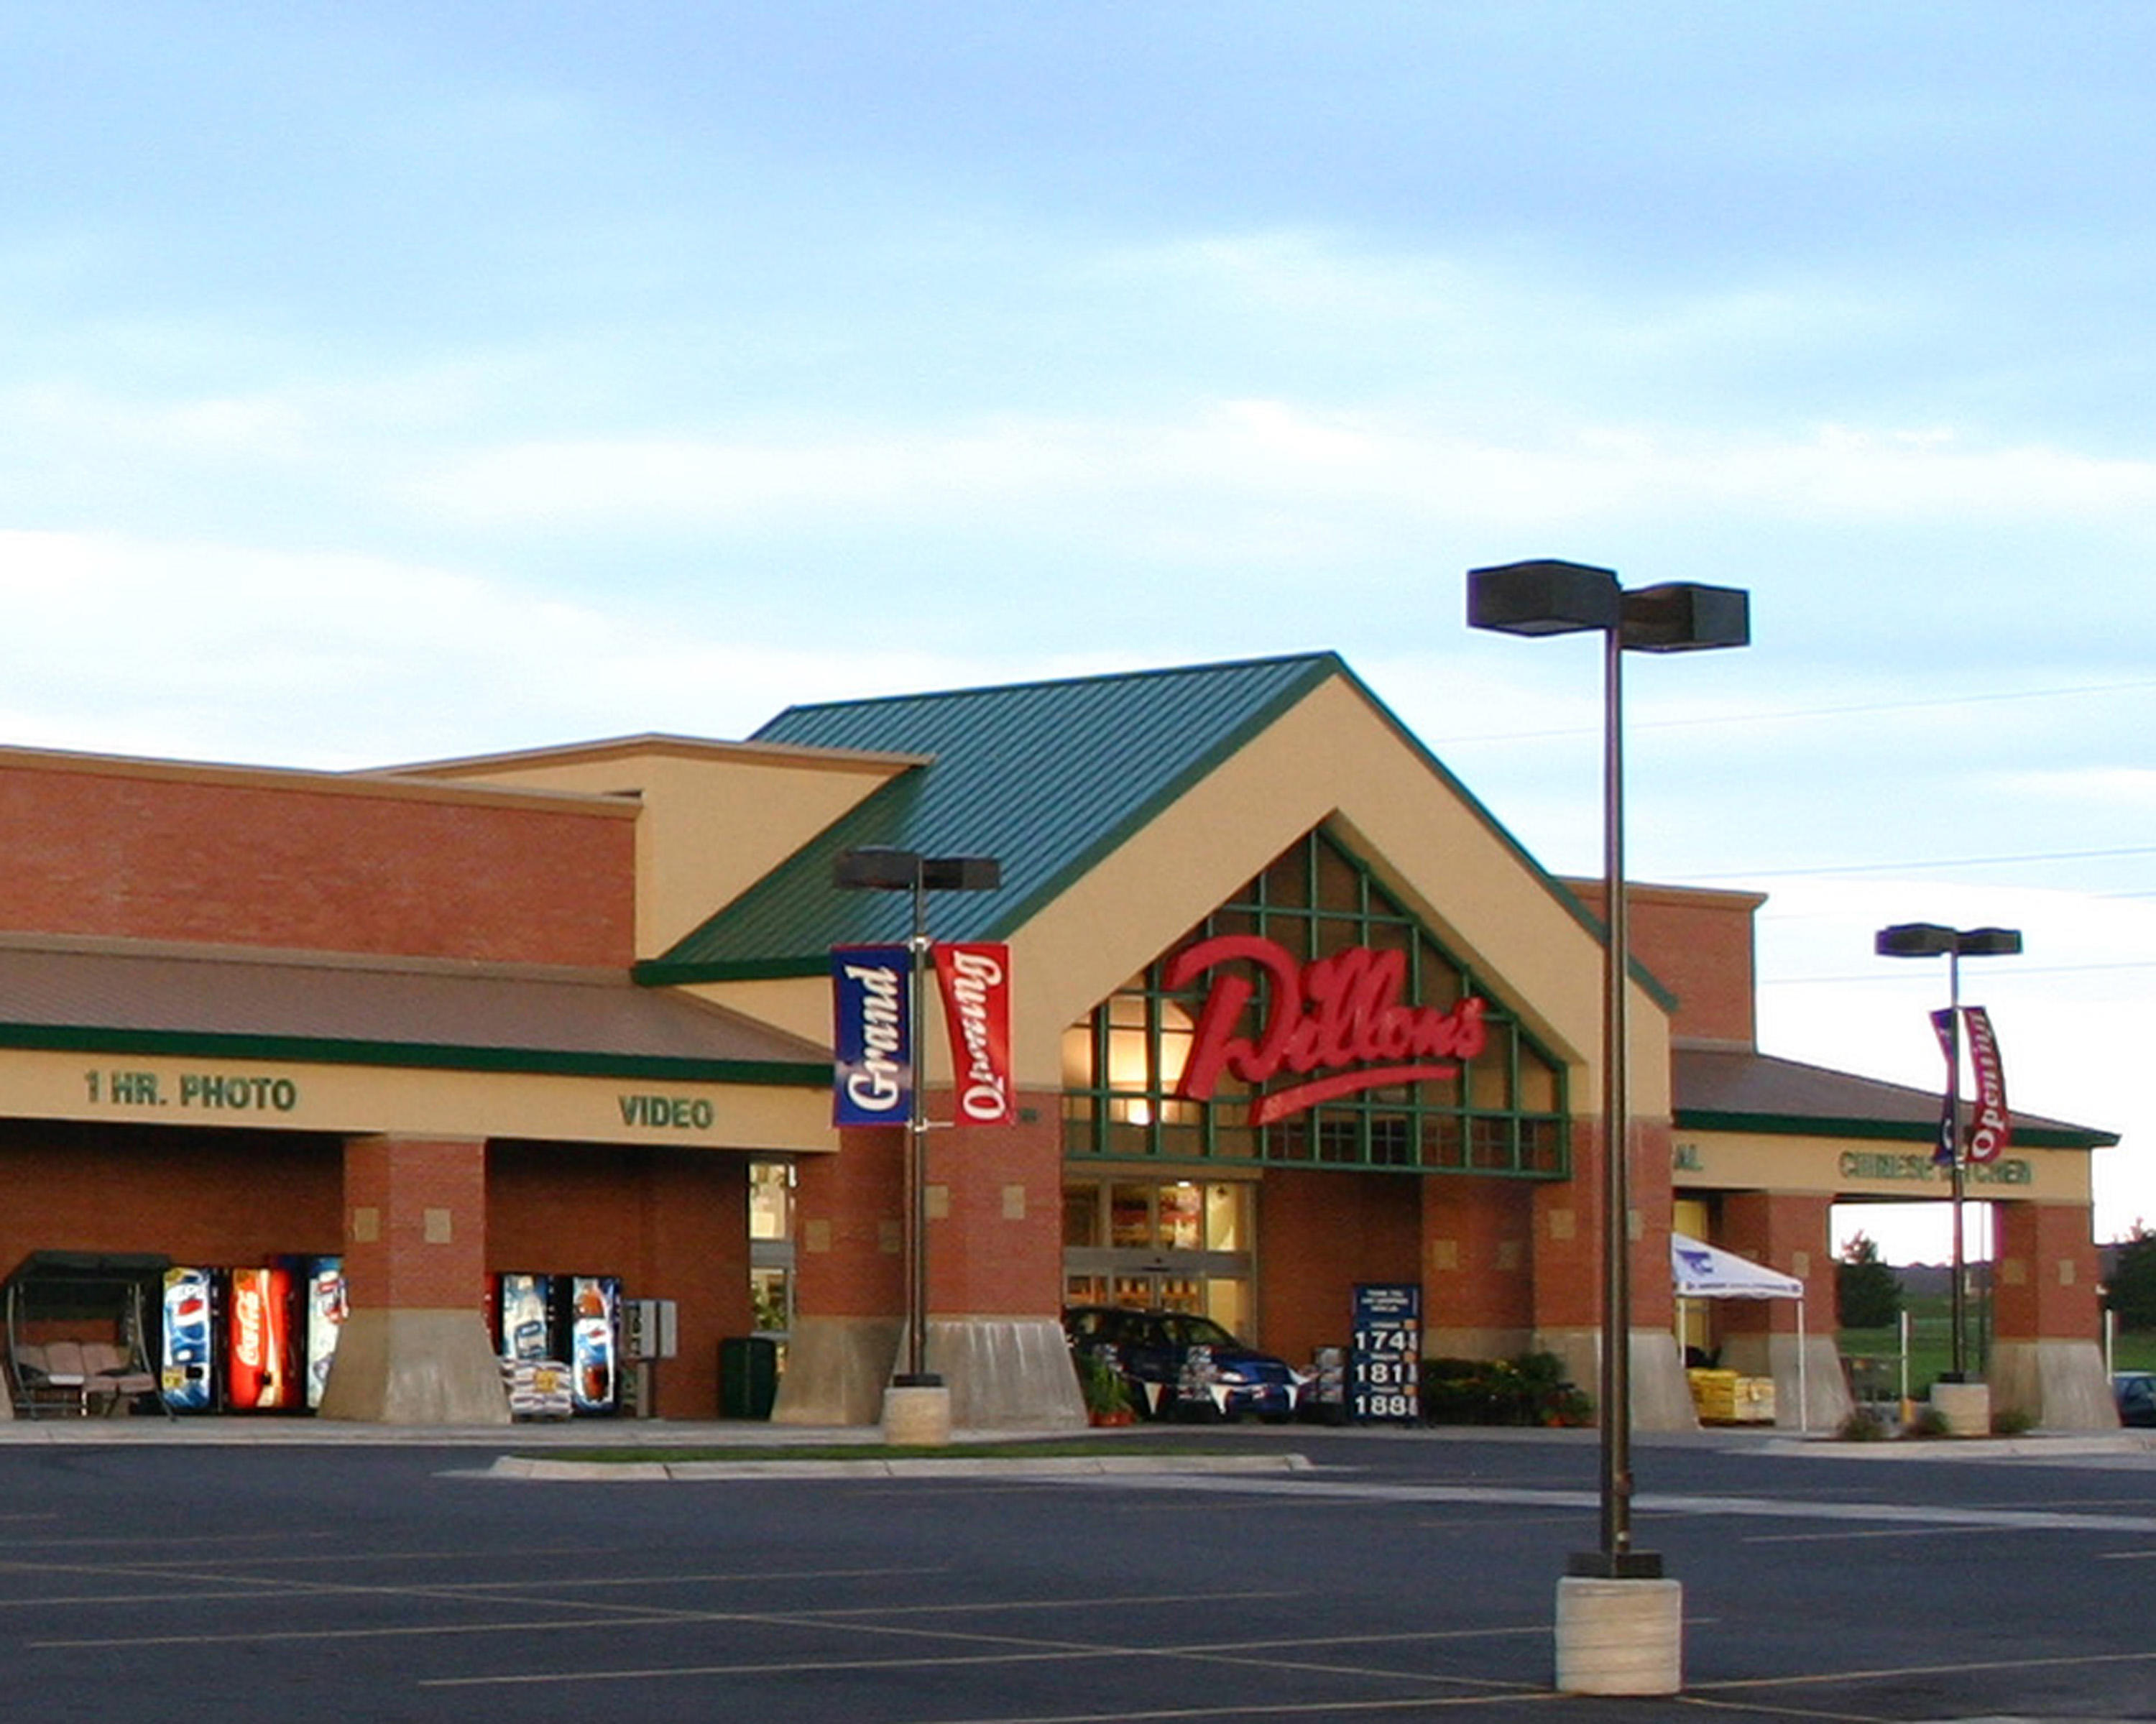 Dillons Food Store | 4107 10th St, Great Bend, KS, 67530 | +1 (620) 792-3591